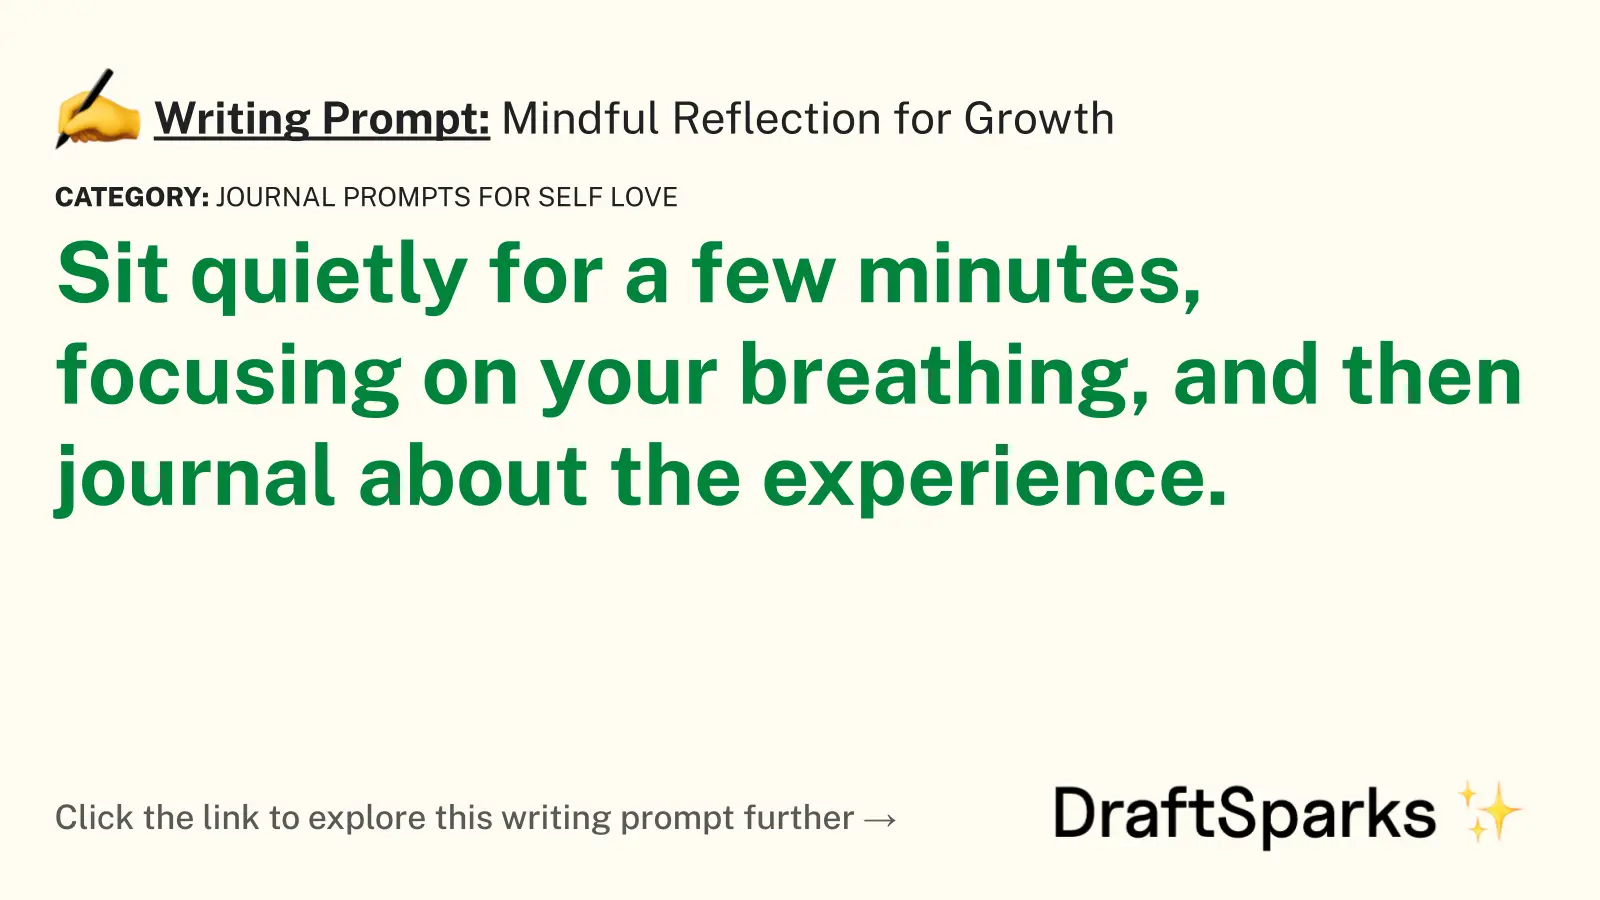 Mindful Reflection for Growth